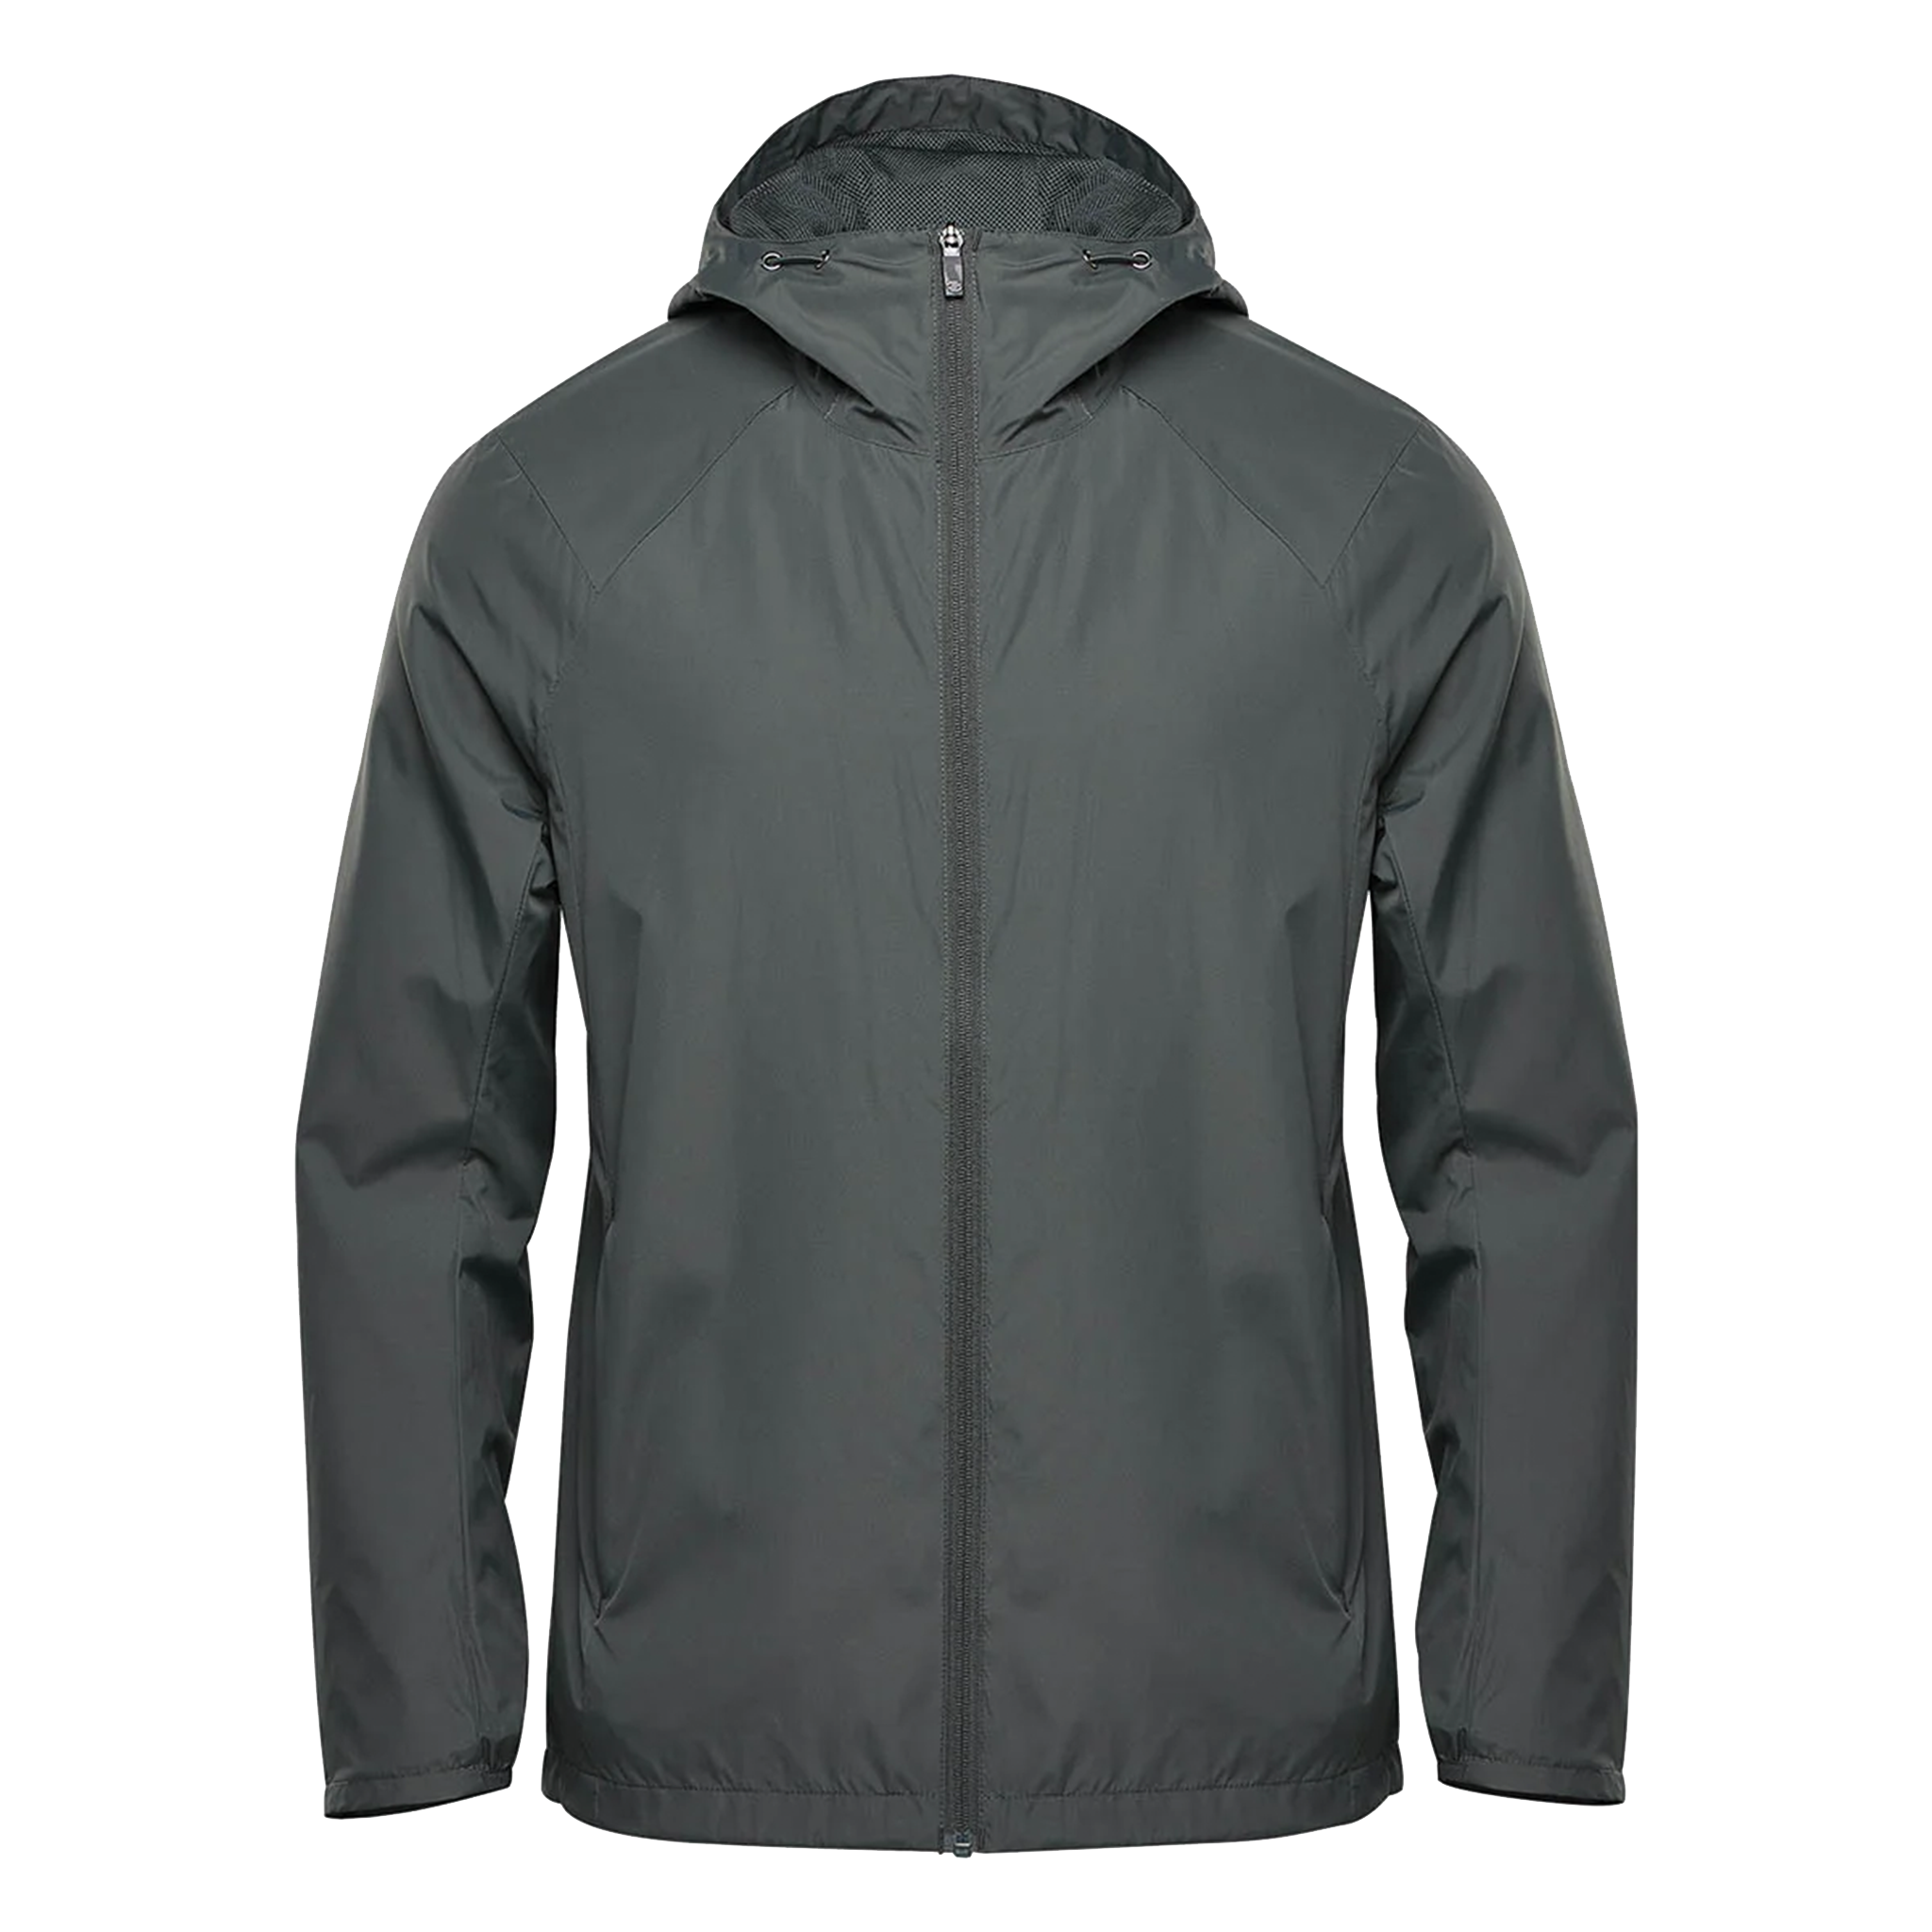 Stormtech Pacifica Jacket - Men's Sizing S-5XL - Charcoal